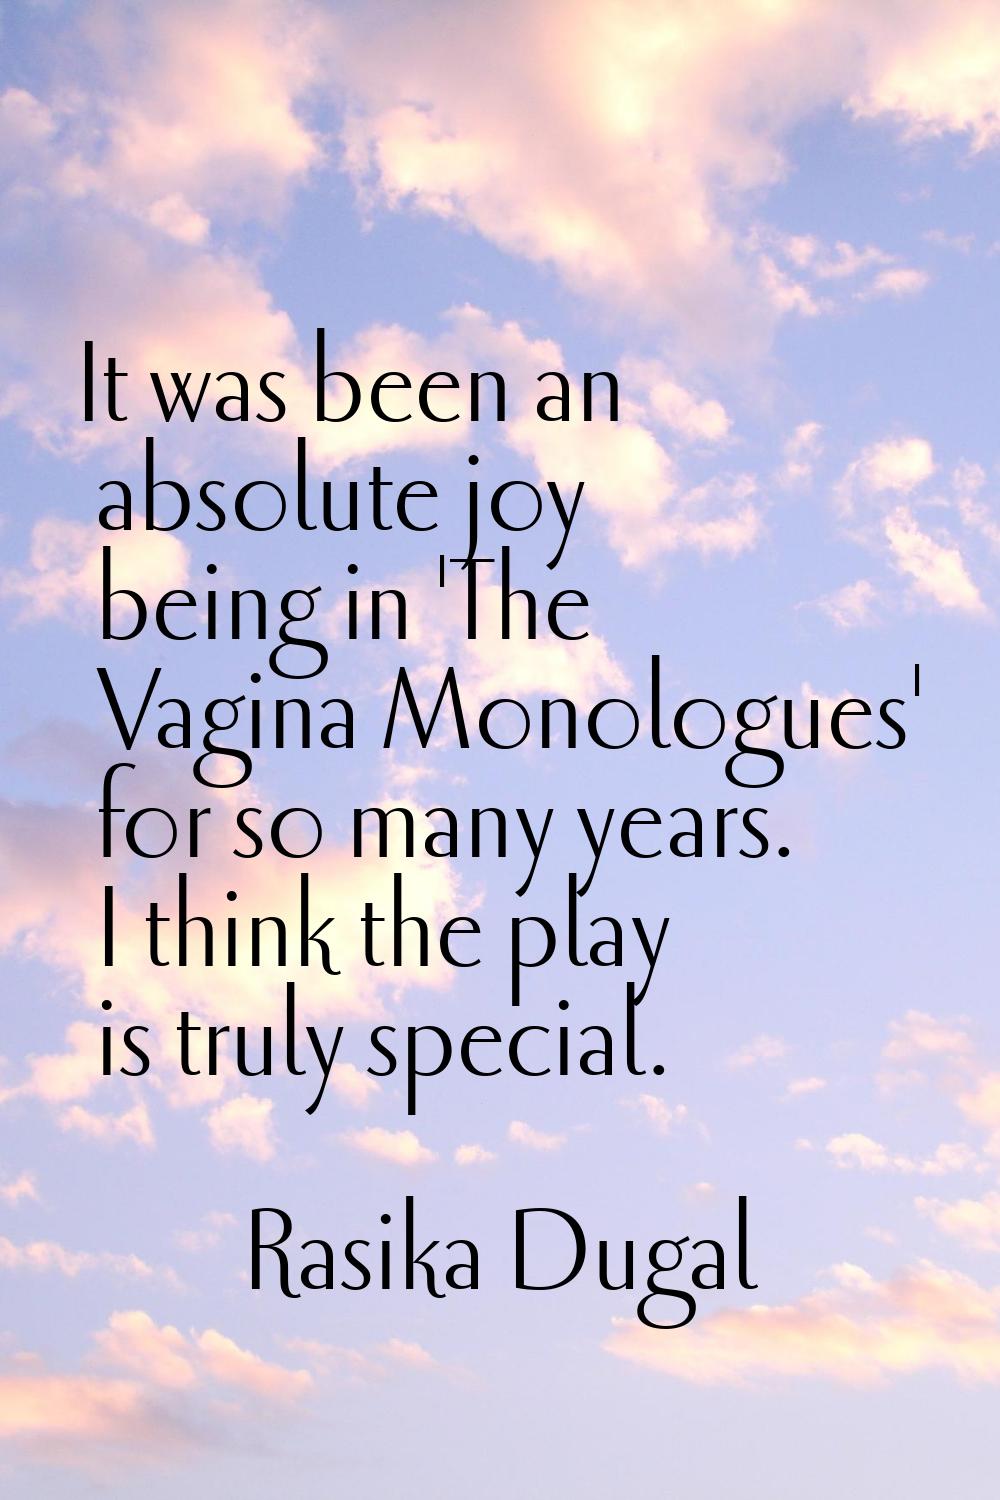 It was been an absolute joy being in 'The Vagina Monologues' for so many years. I think the play is